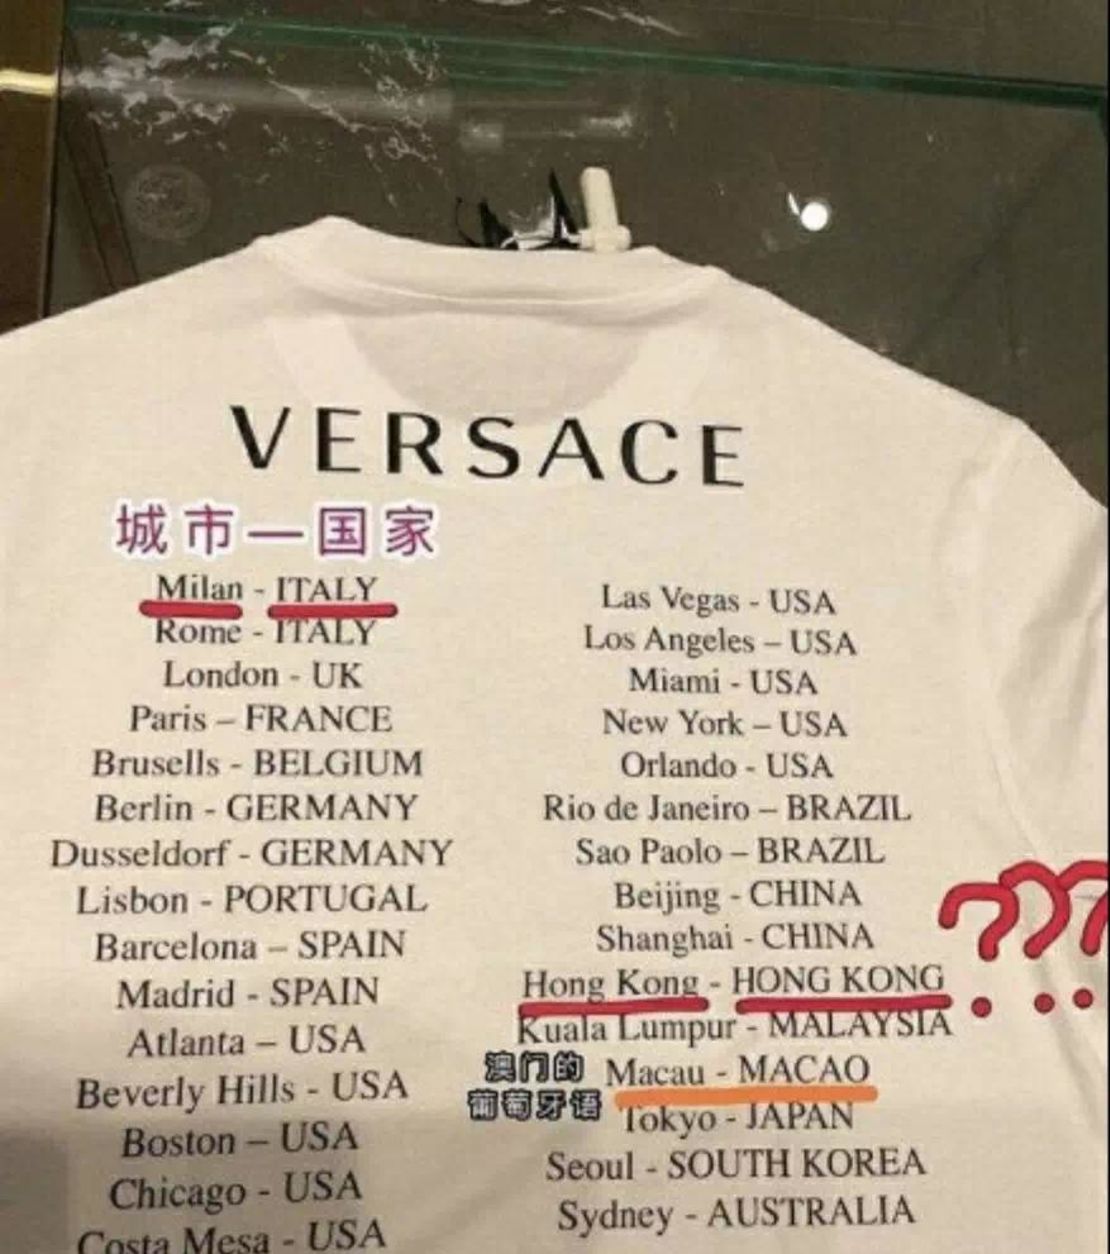 Givenchy back in the U.S., starting with Las Vegas